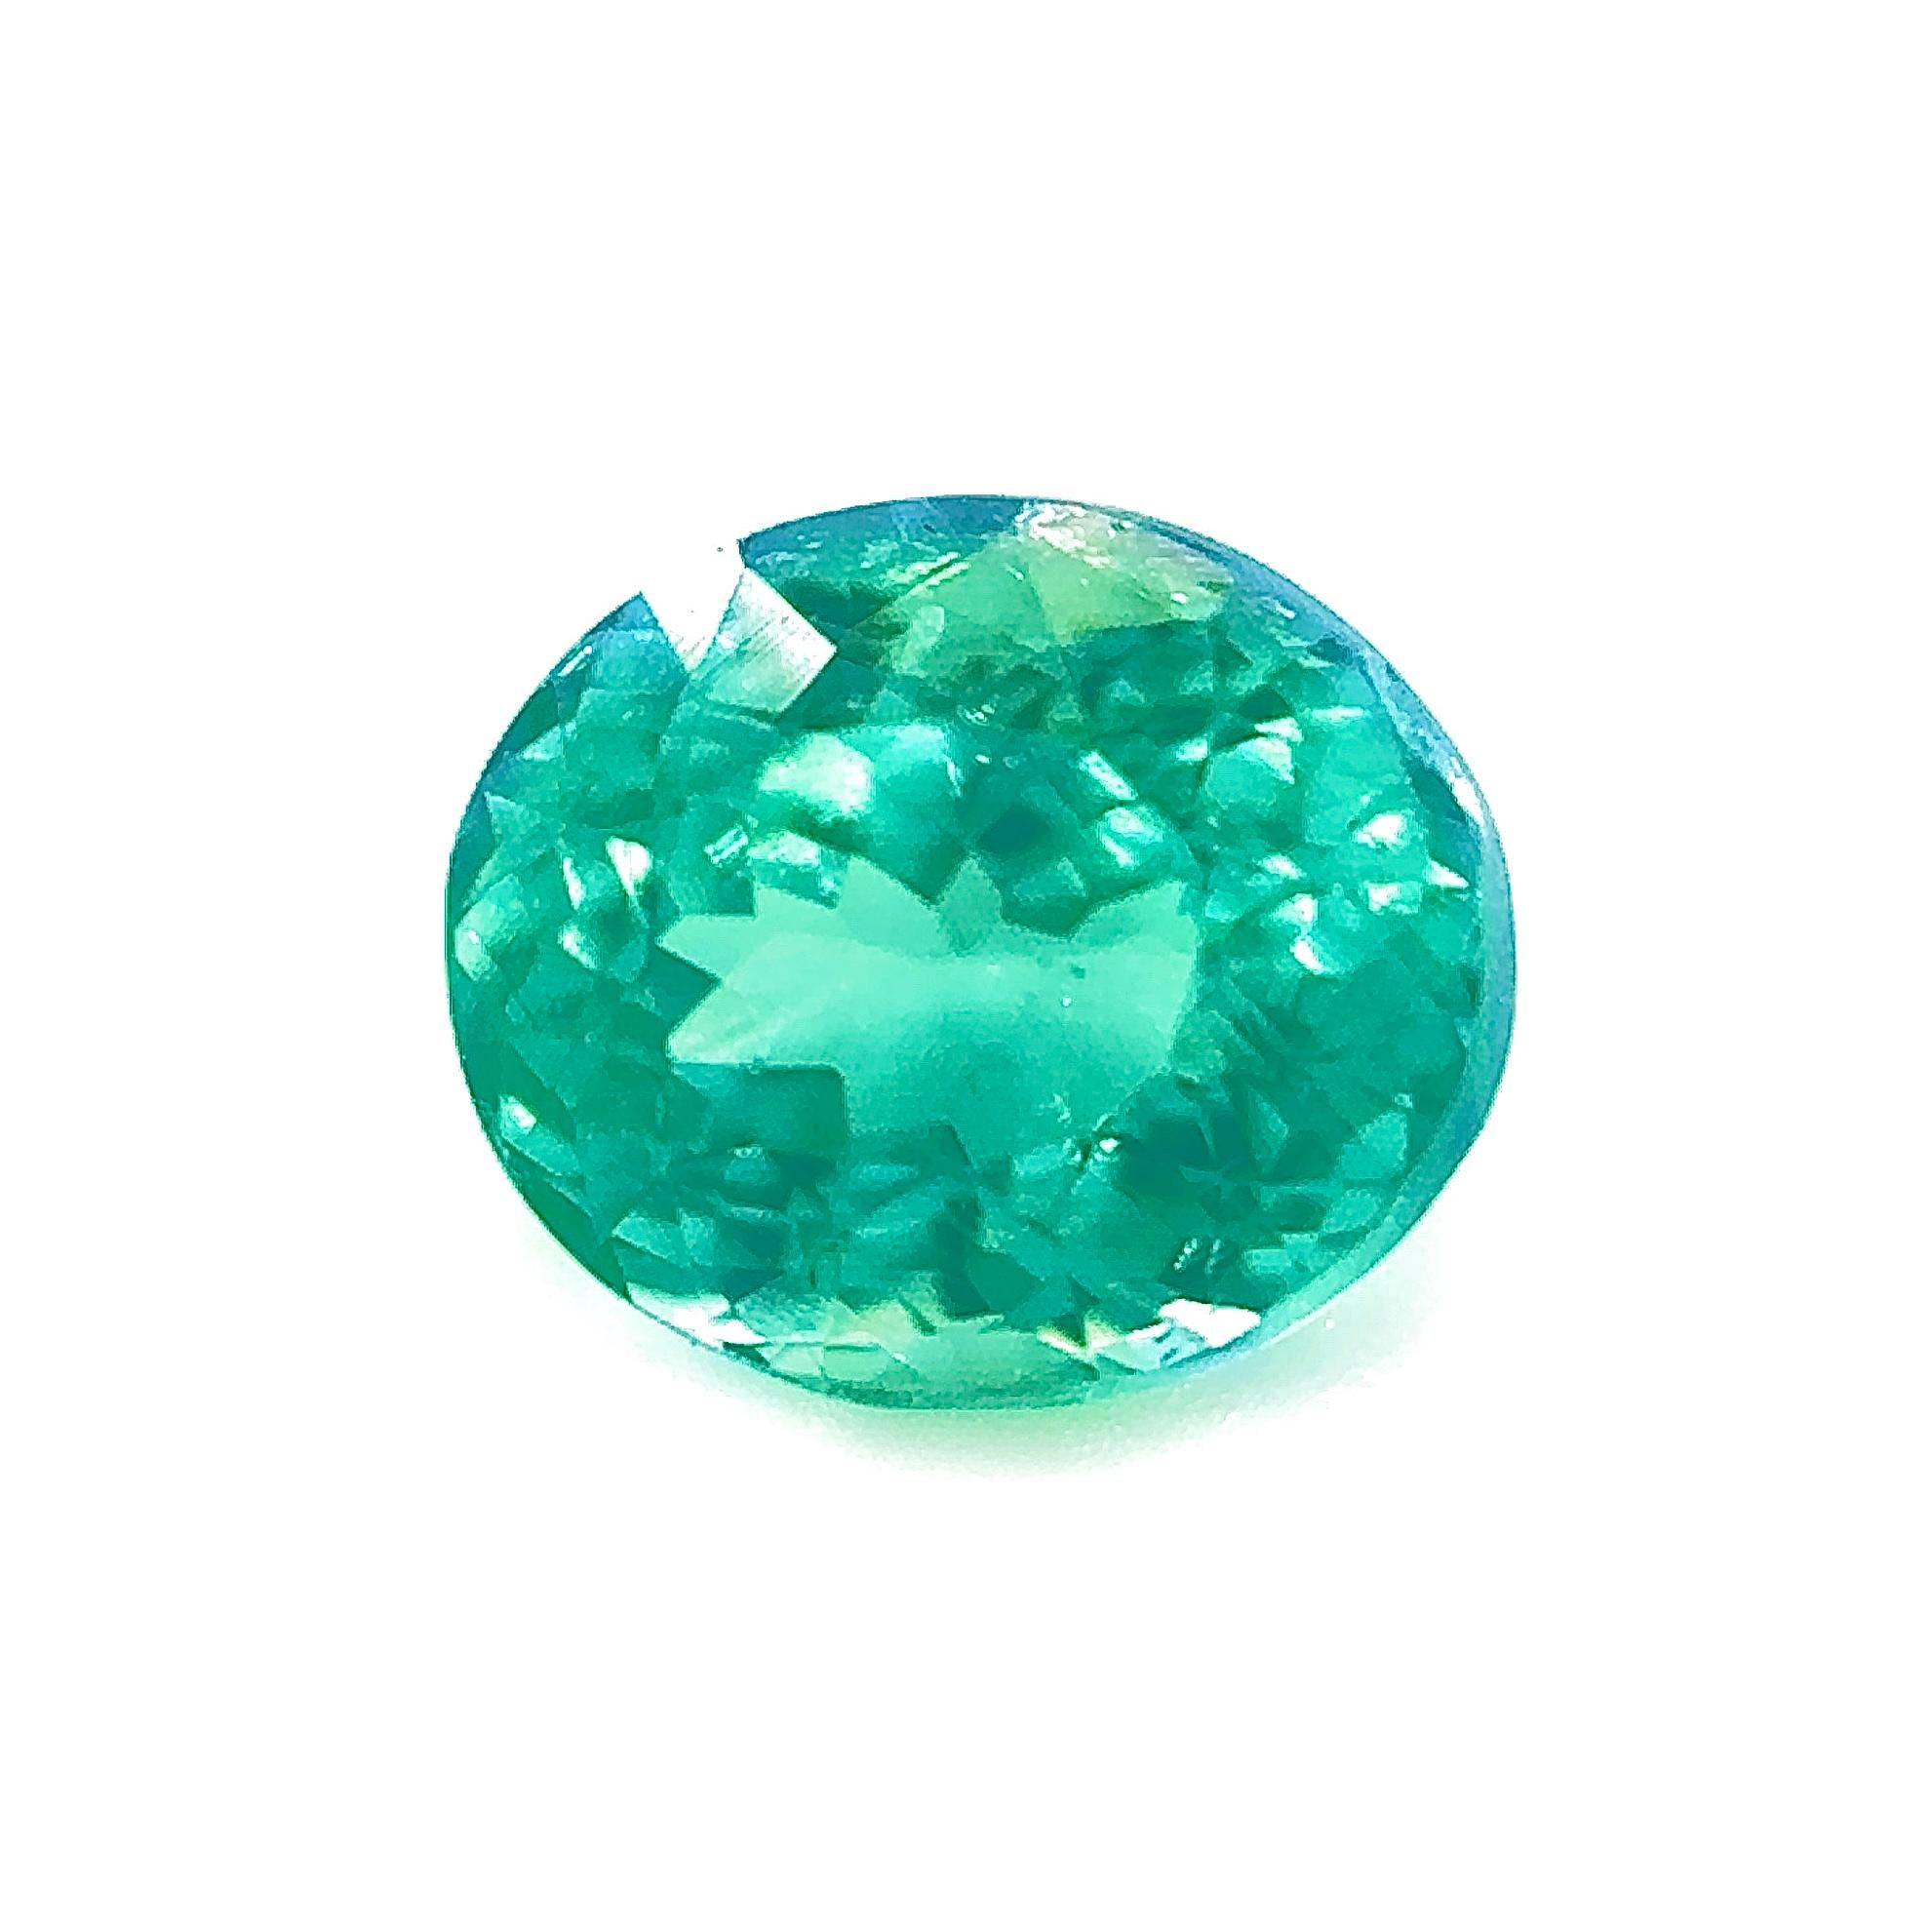 Oval Cut 1.20 Carat Paraiba Tourmaline Loose Stone in Nylon Green and Blue  For Sale